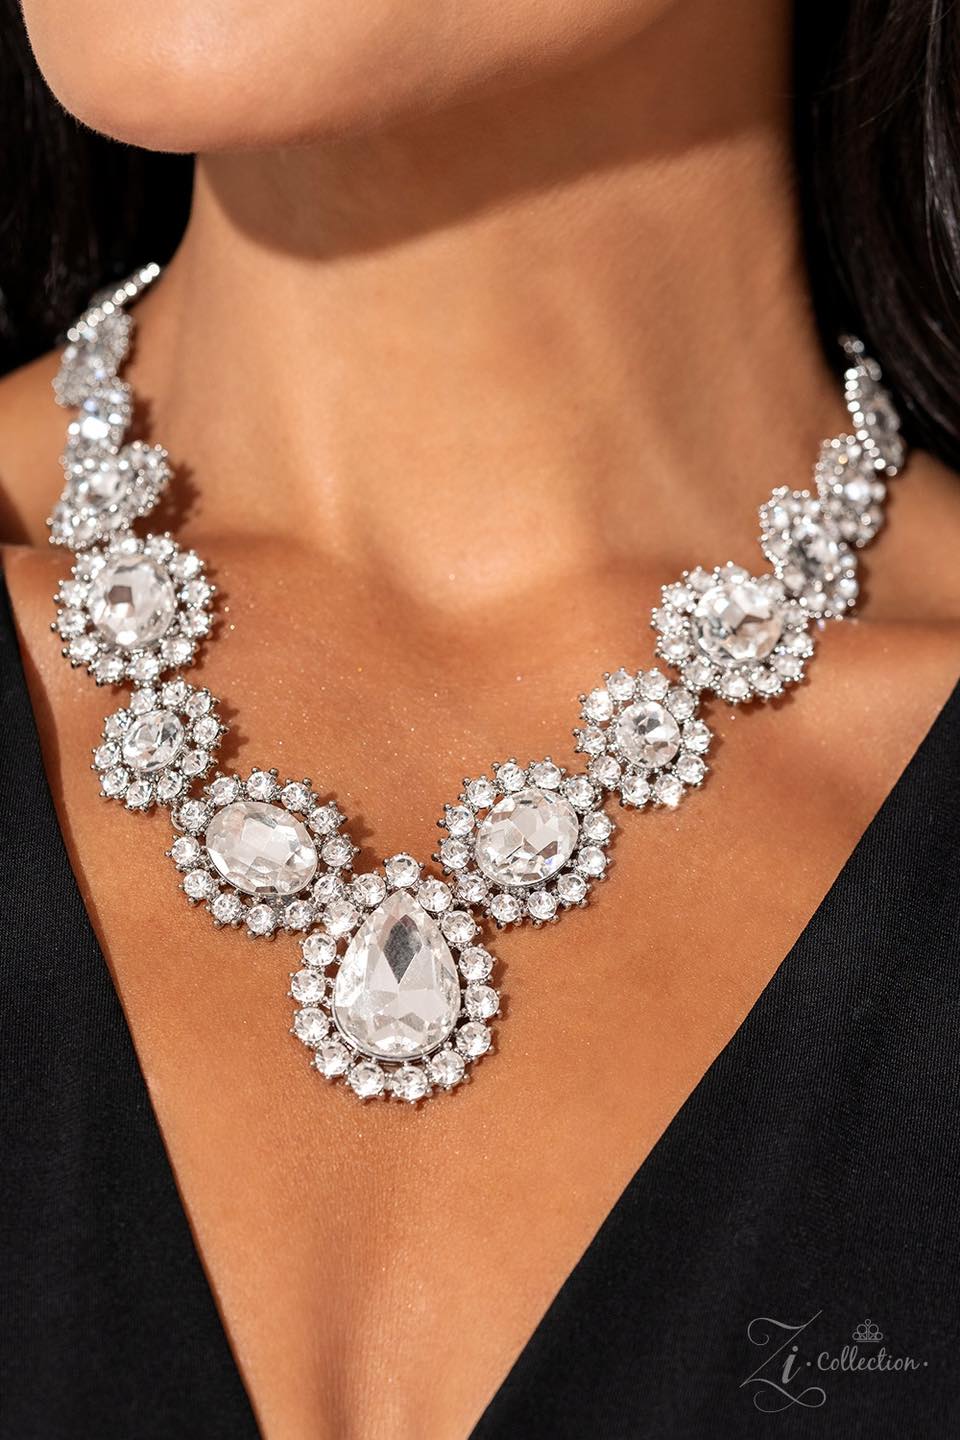 Everlasting 2023 Zi Collection Necklace - Paparazzi Accessories- lightbox - CarasShop.com - $5 Jewelry by Cara Jewels